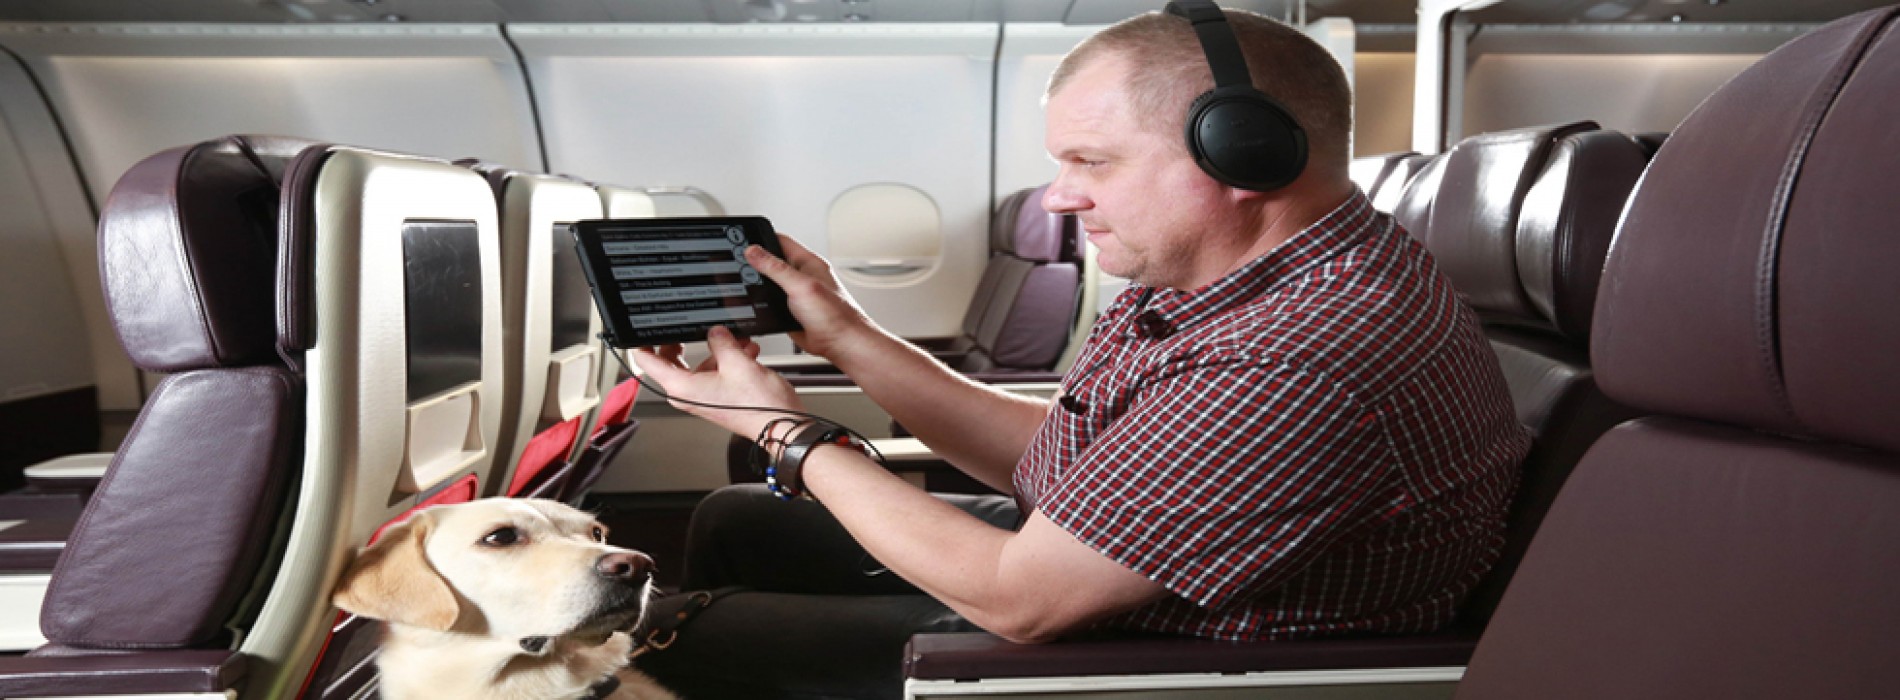 Virgin Atlantic becomes first airline to offer accessible entertainment for customers with sight loss